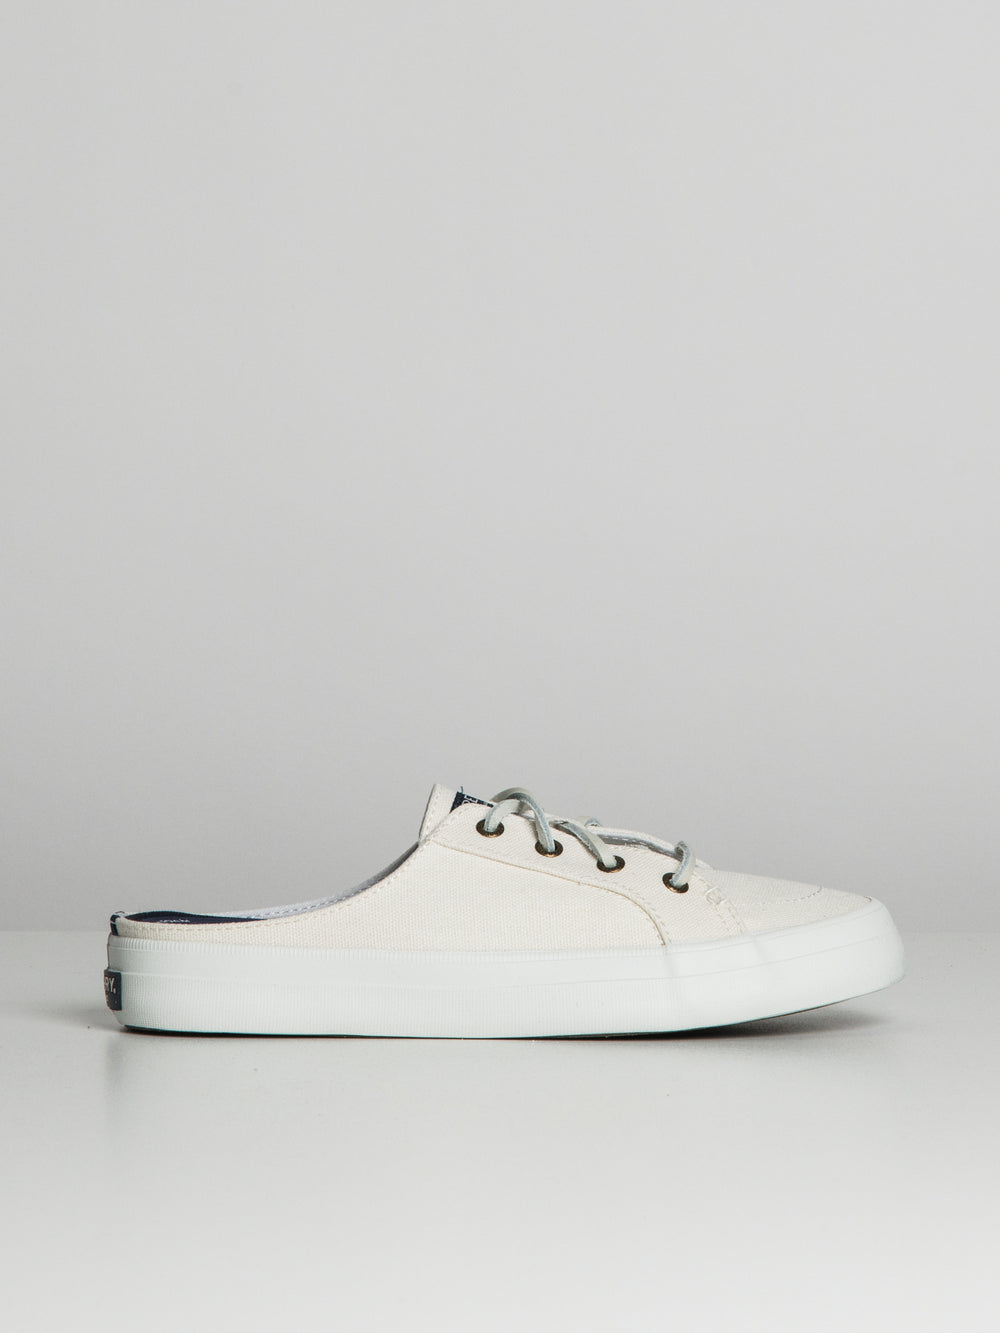 WOMENS SPERRY CREST MULE CANVAS